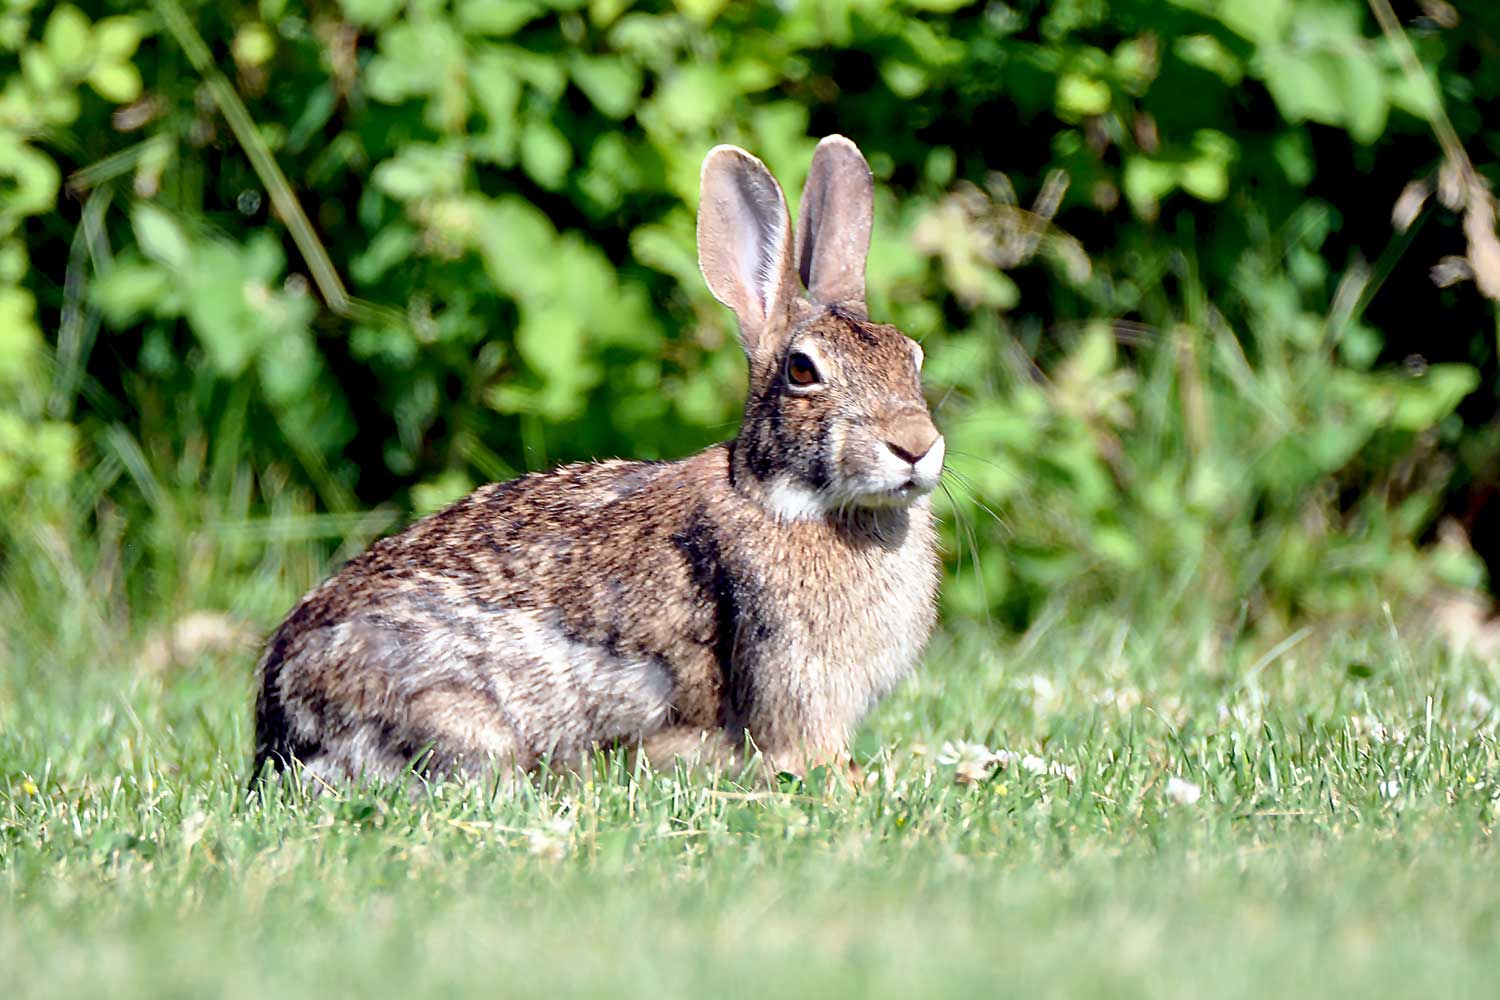 A cottontail rabbit standing in the grass.